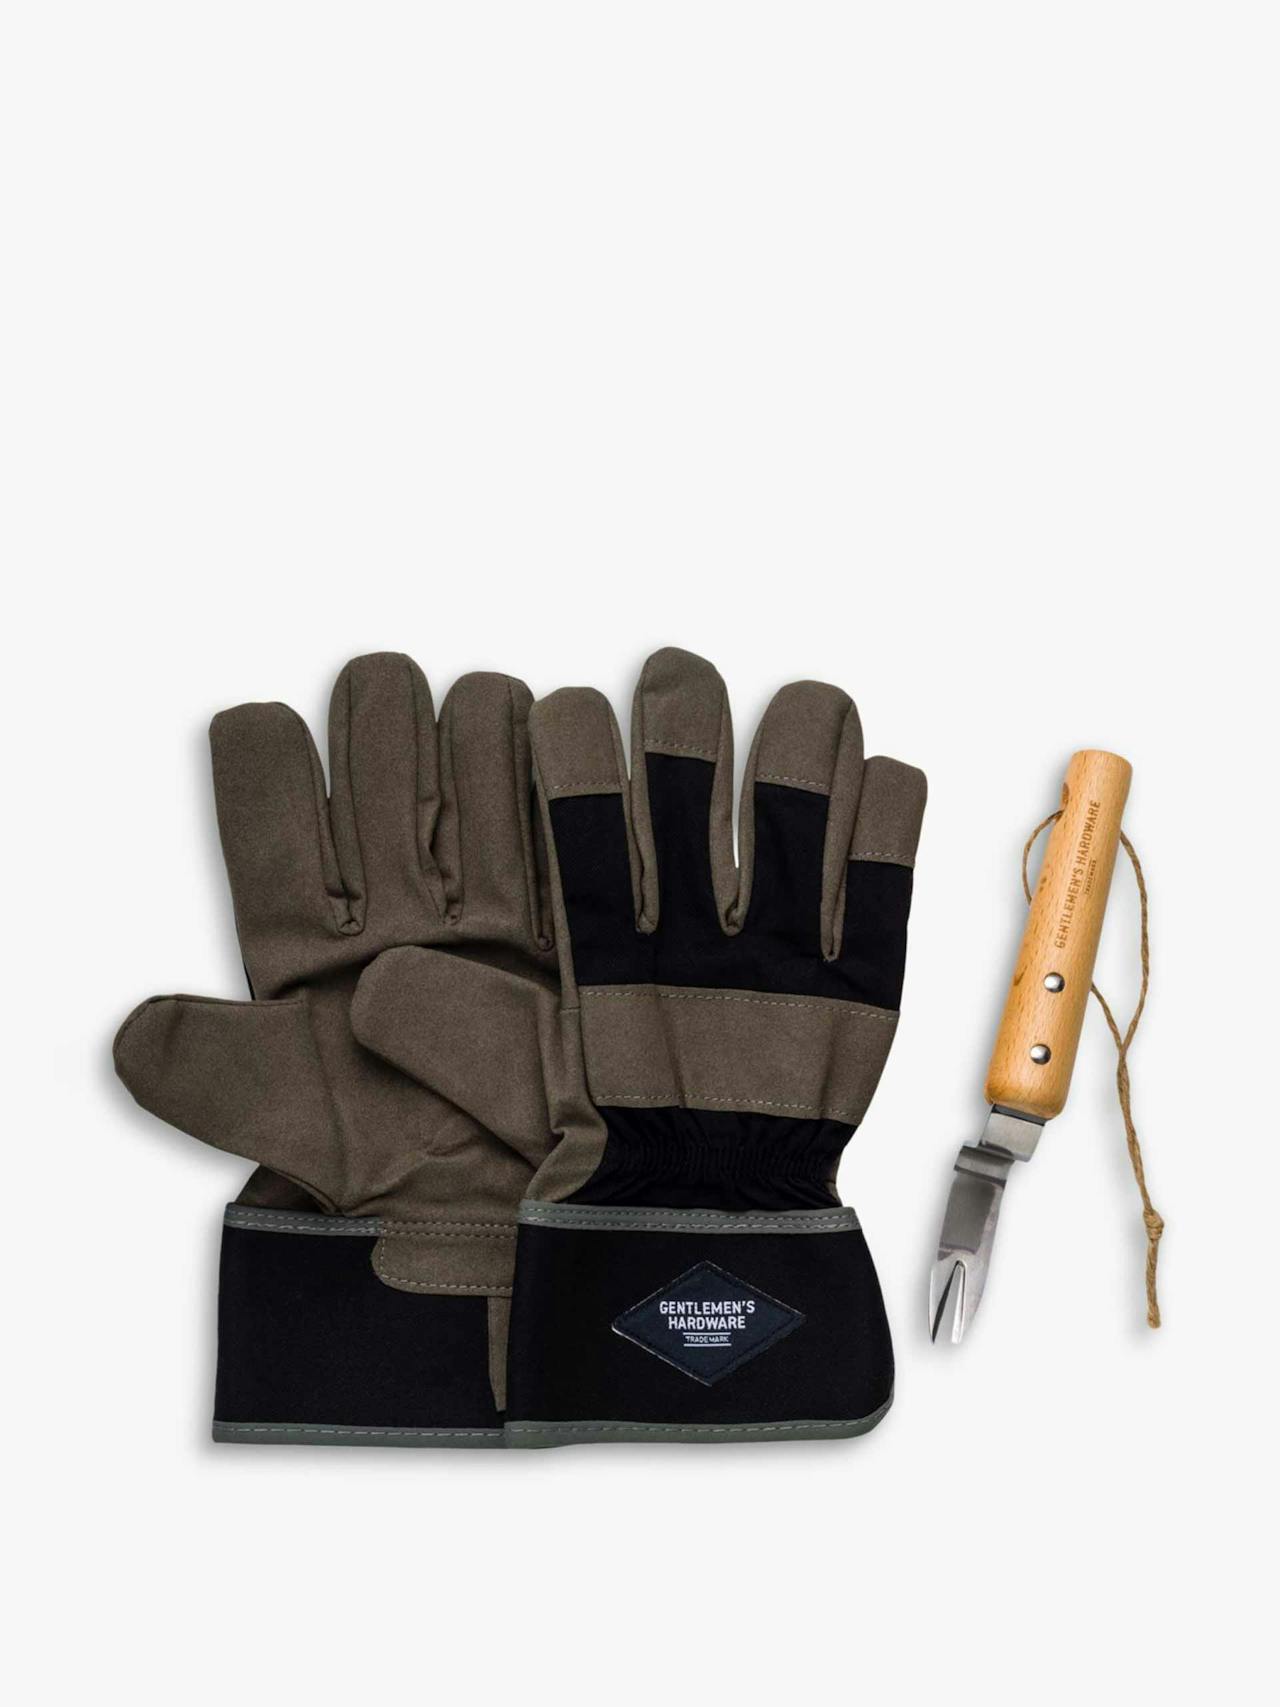 Hardware garden gloves and root lifter